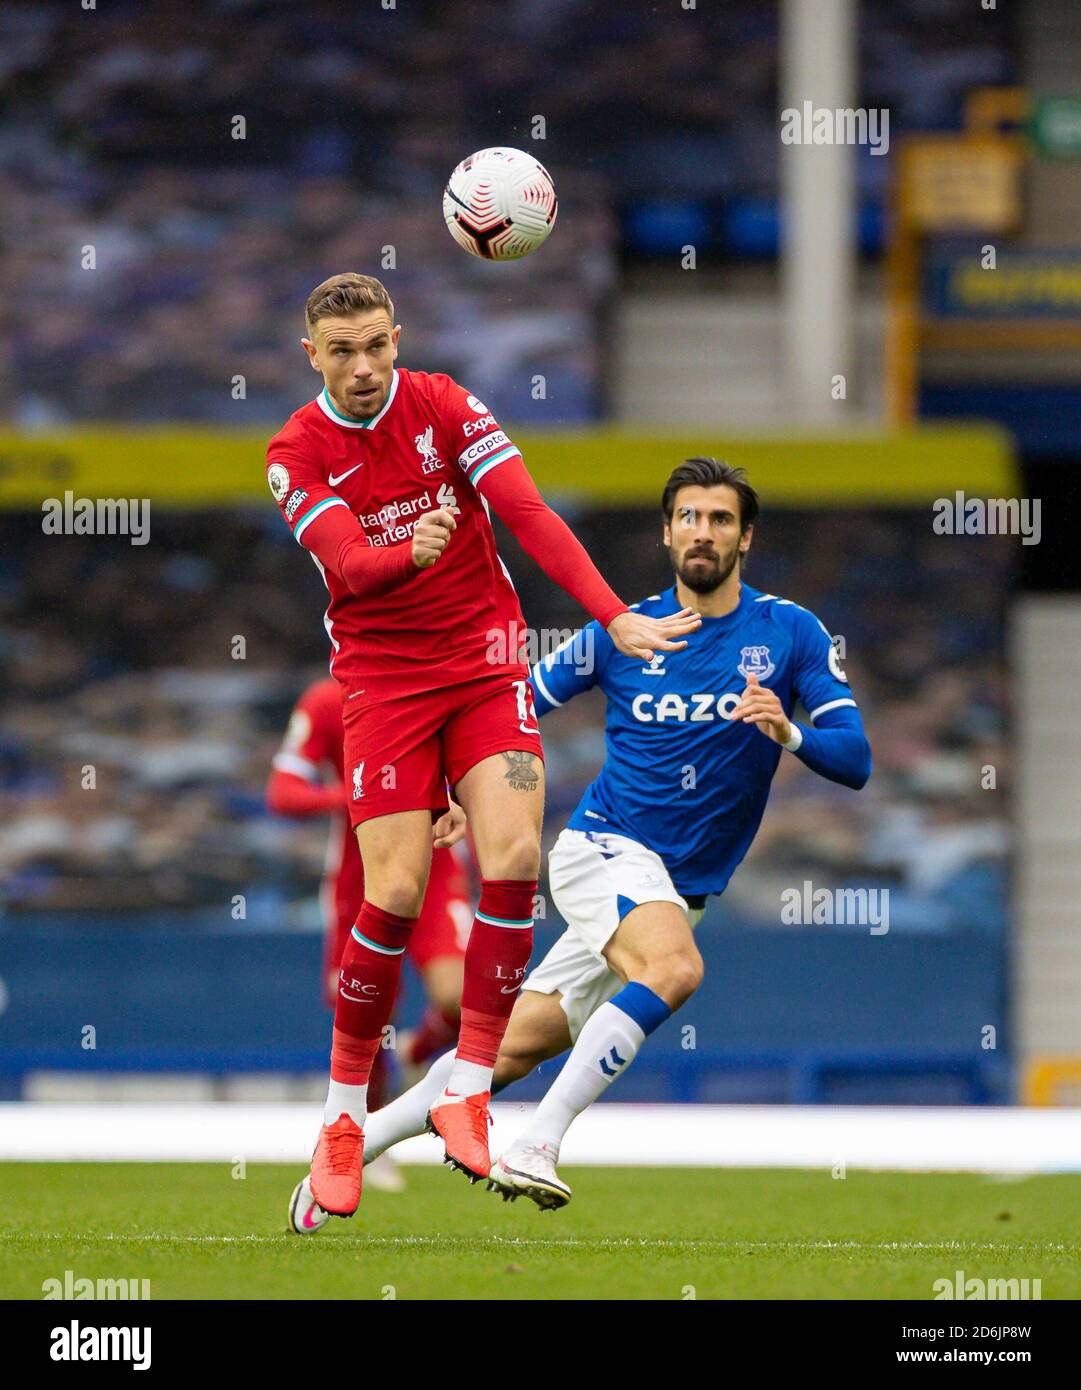 Liverpool. 18th Oct, 2020. Liverpool's captain Jordan Henderson (L) vies with Everton's Andre Gomes during the Premier League match between Everton FC and Liverpool FC at Goodison Park in Liverpool, Britain, on Oct. 17, 2020. The game ended in a 2-2 draw. Credit: Xinhua/Alamy Live News Stock Photo